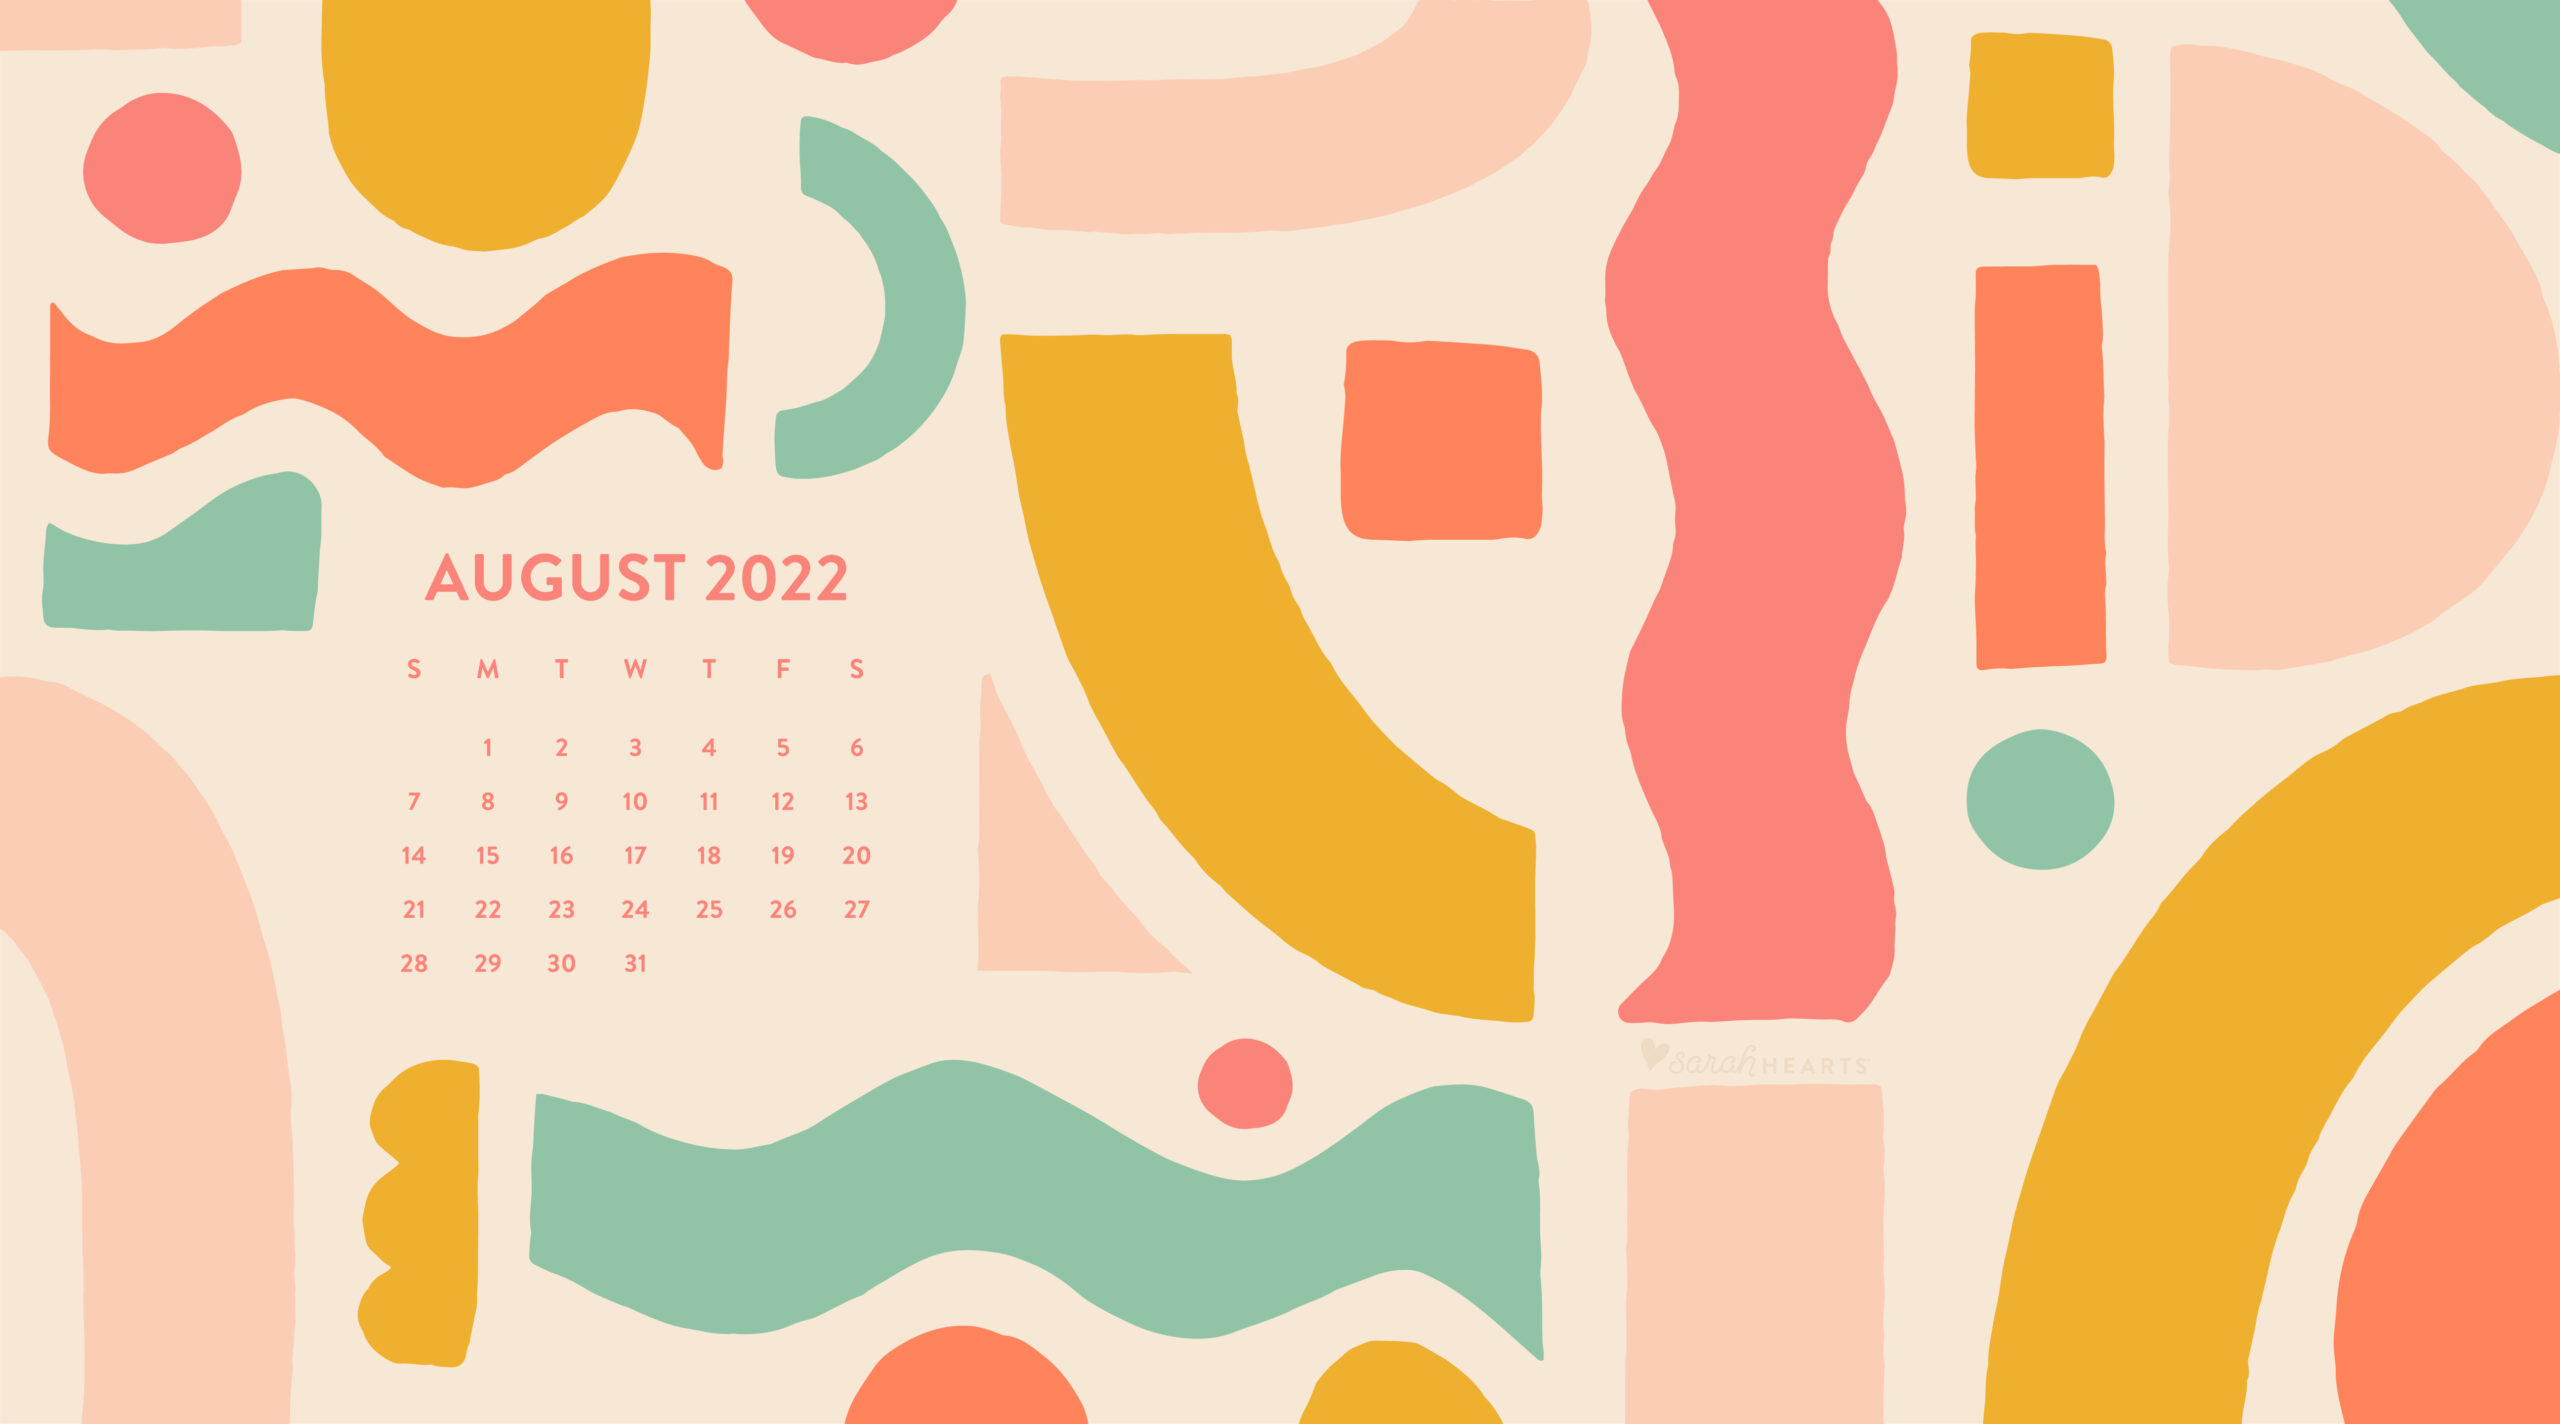 Download wallpapers 2022 August Calendar 4k background with flowers  different flowers 2022 summer calendars August 2022 calendars August  2022 Calendar for desktop free Pictures for desktop free